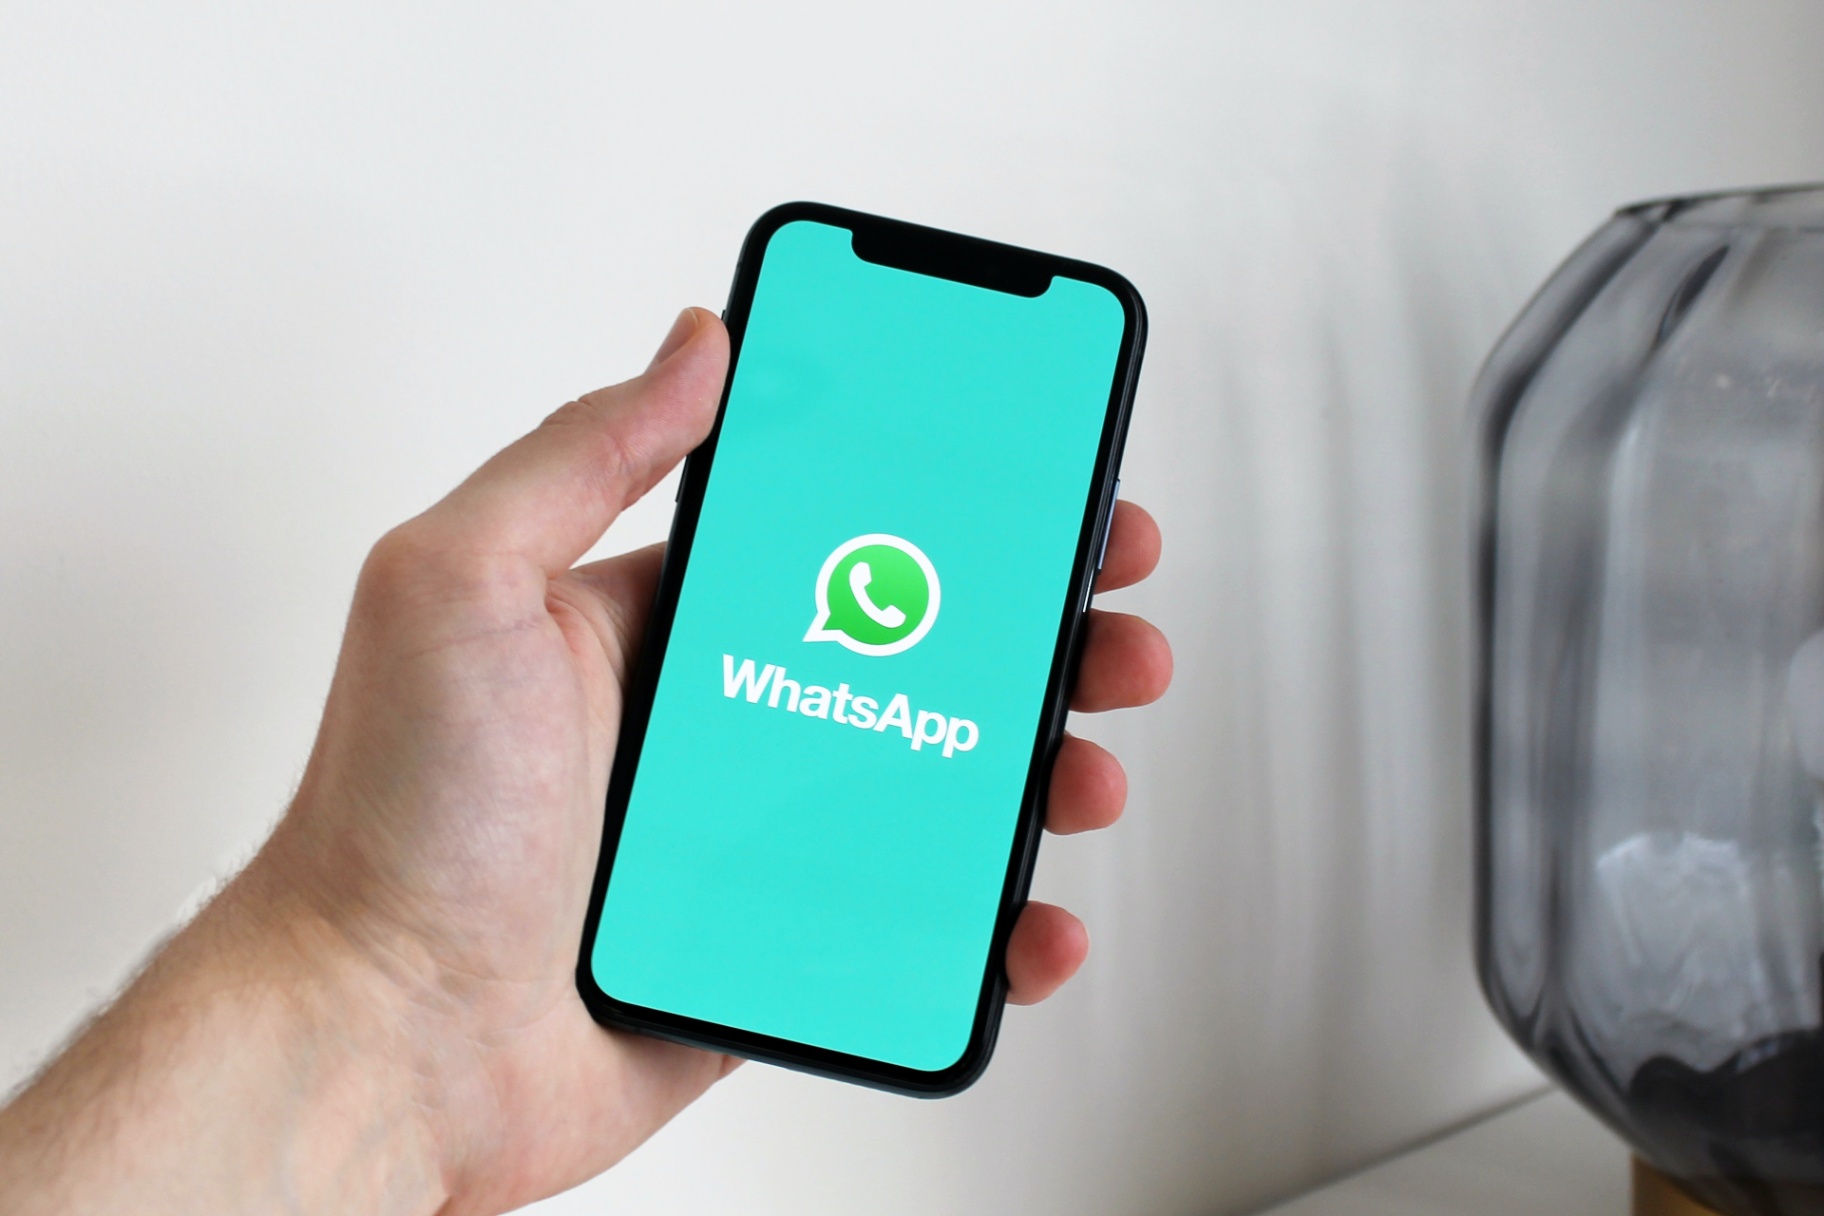 WhatsApp Beta for iOS: New Update Allows User to Pause Audio Recordings Before Sending